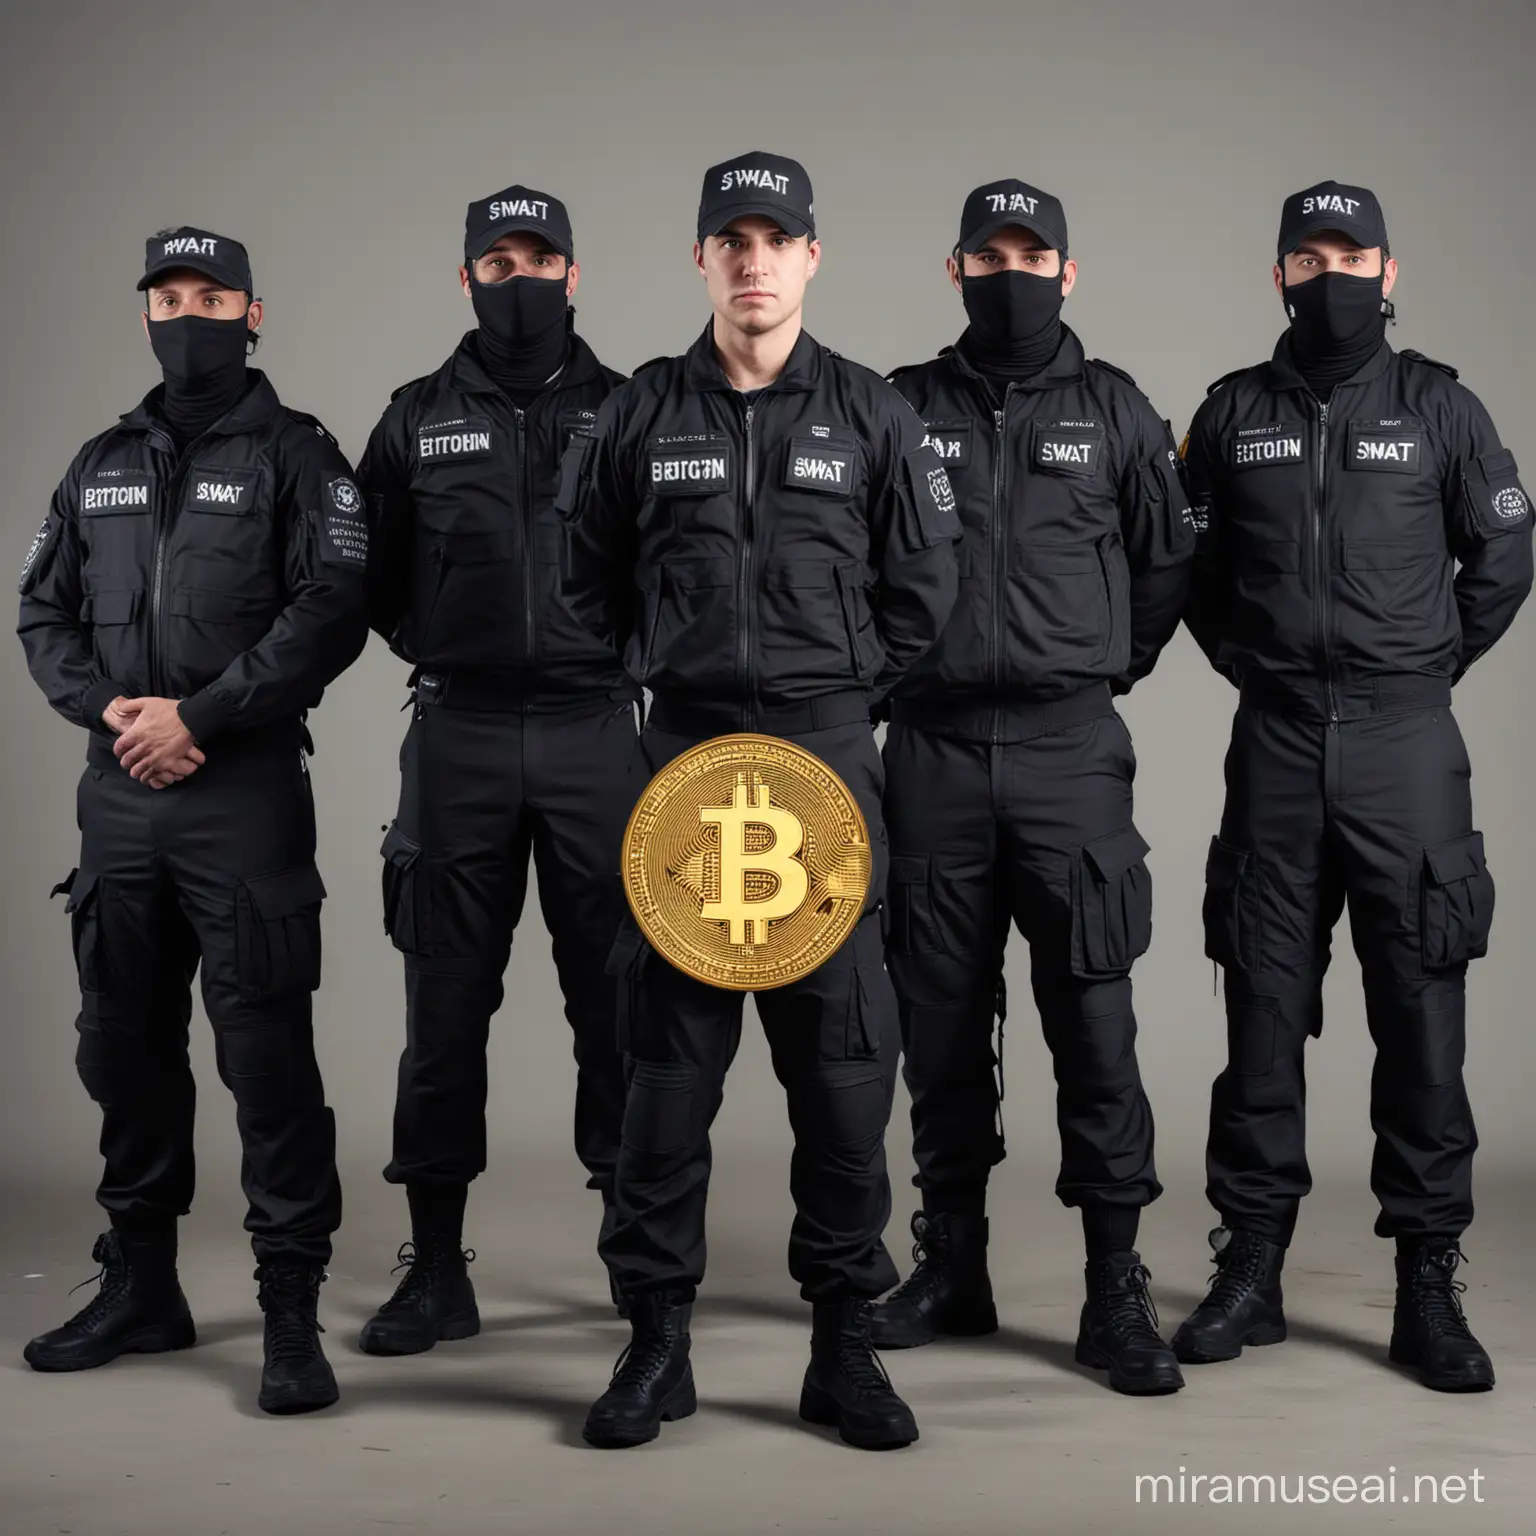 Elite SWAT Team of 6 with Tactical Gear and Bitcoin Symbols